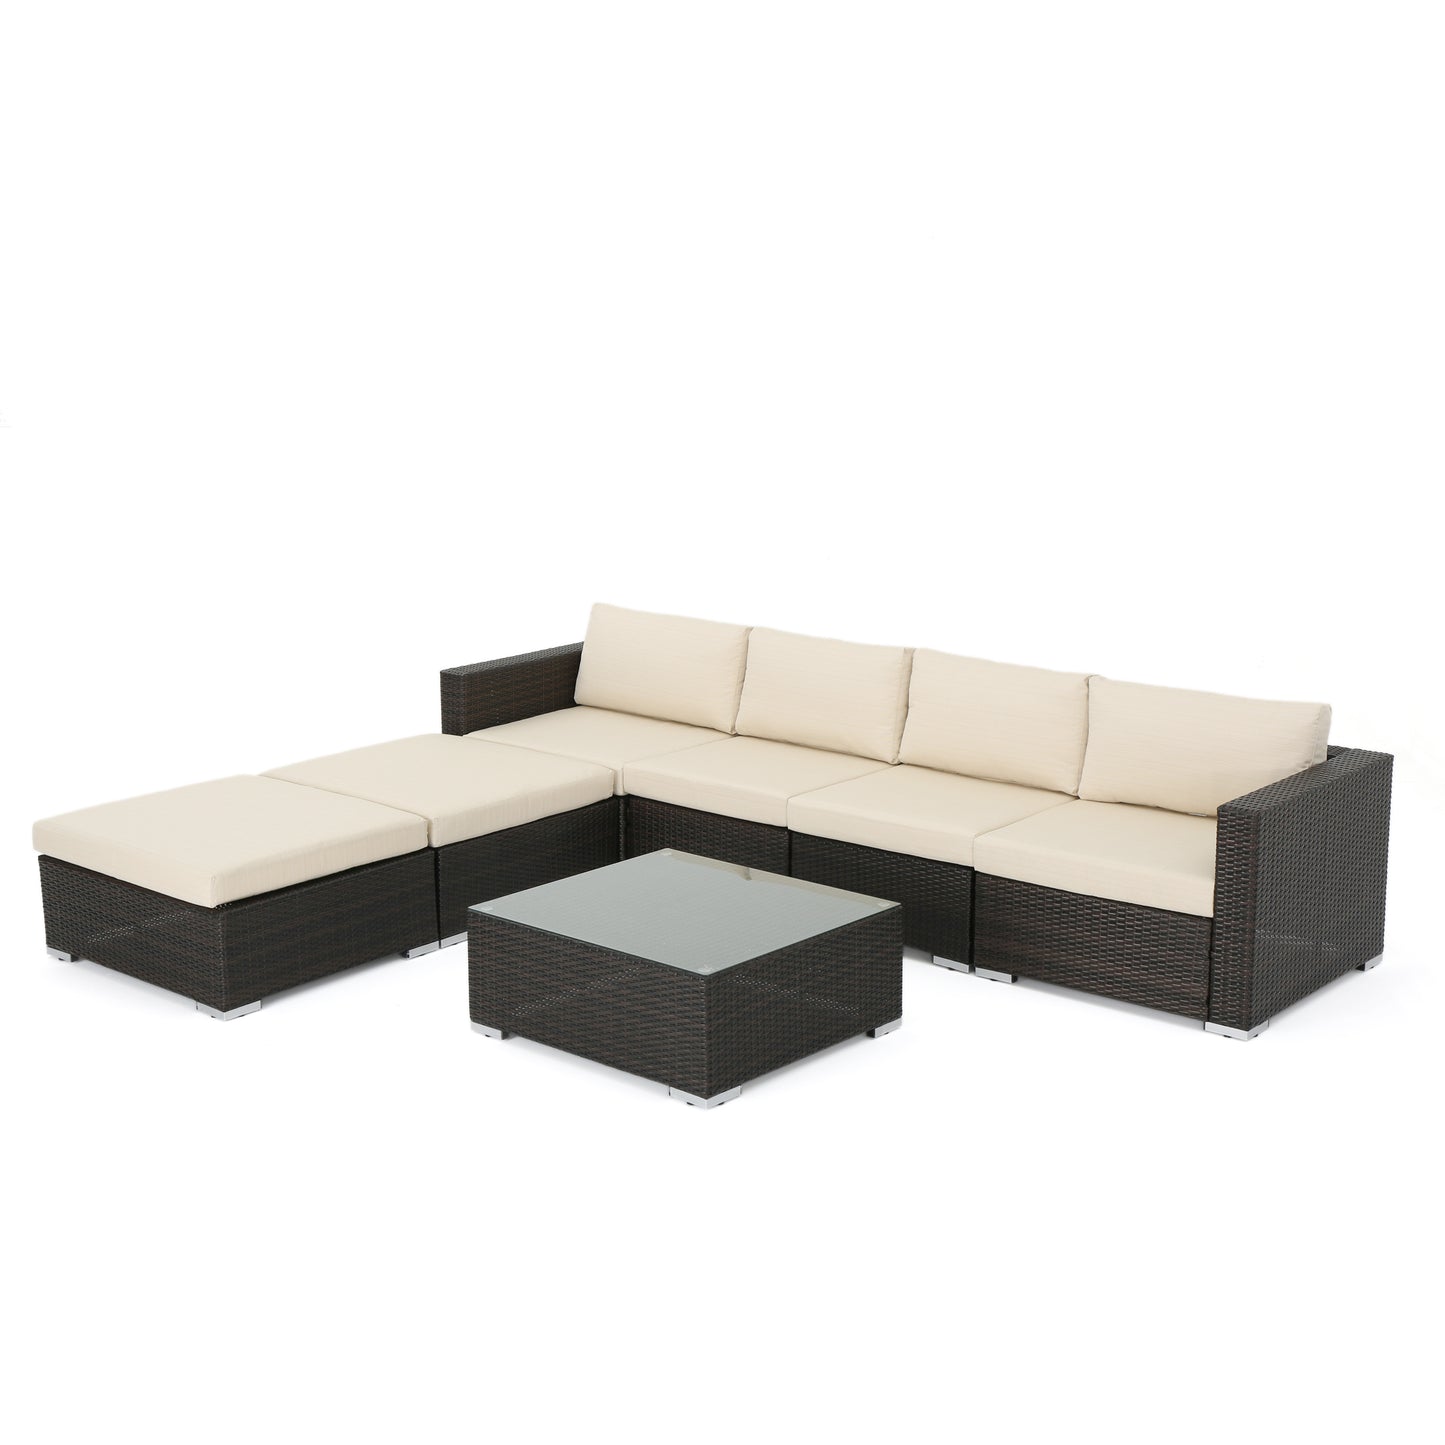 Francisco 7pc Outdoor Wicker Sectional w/ Cushions